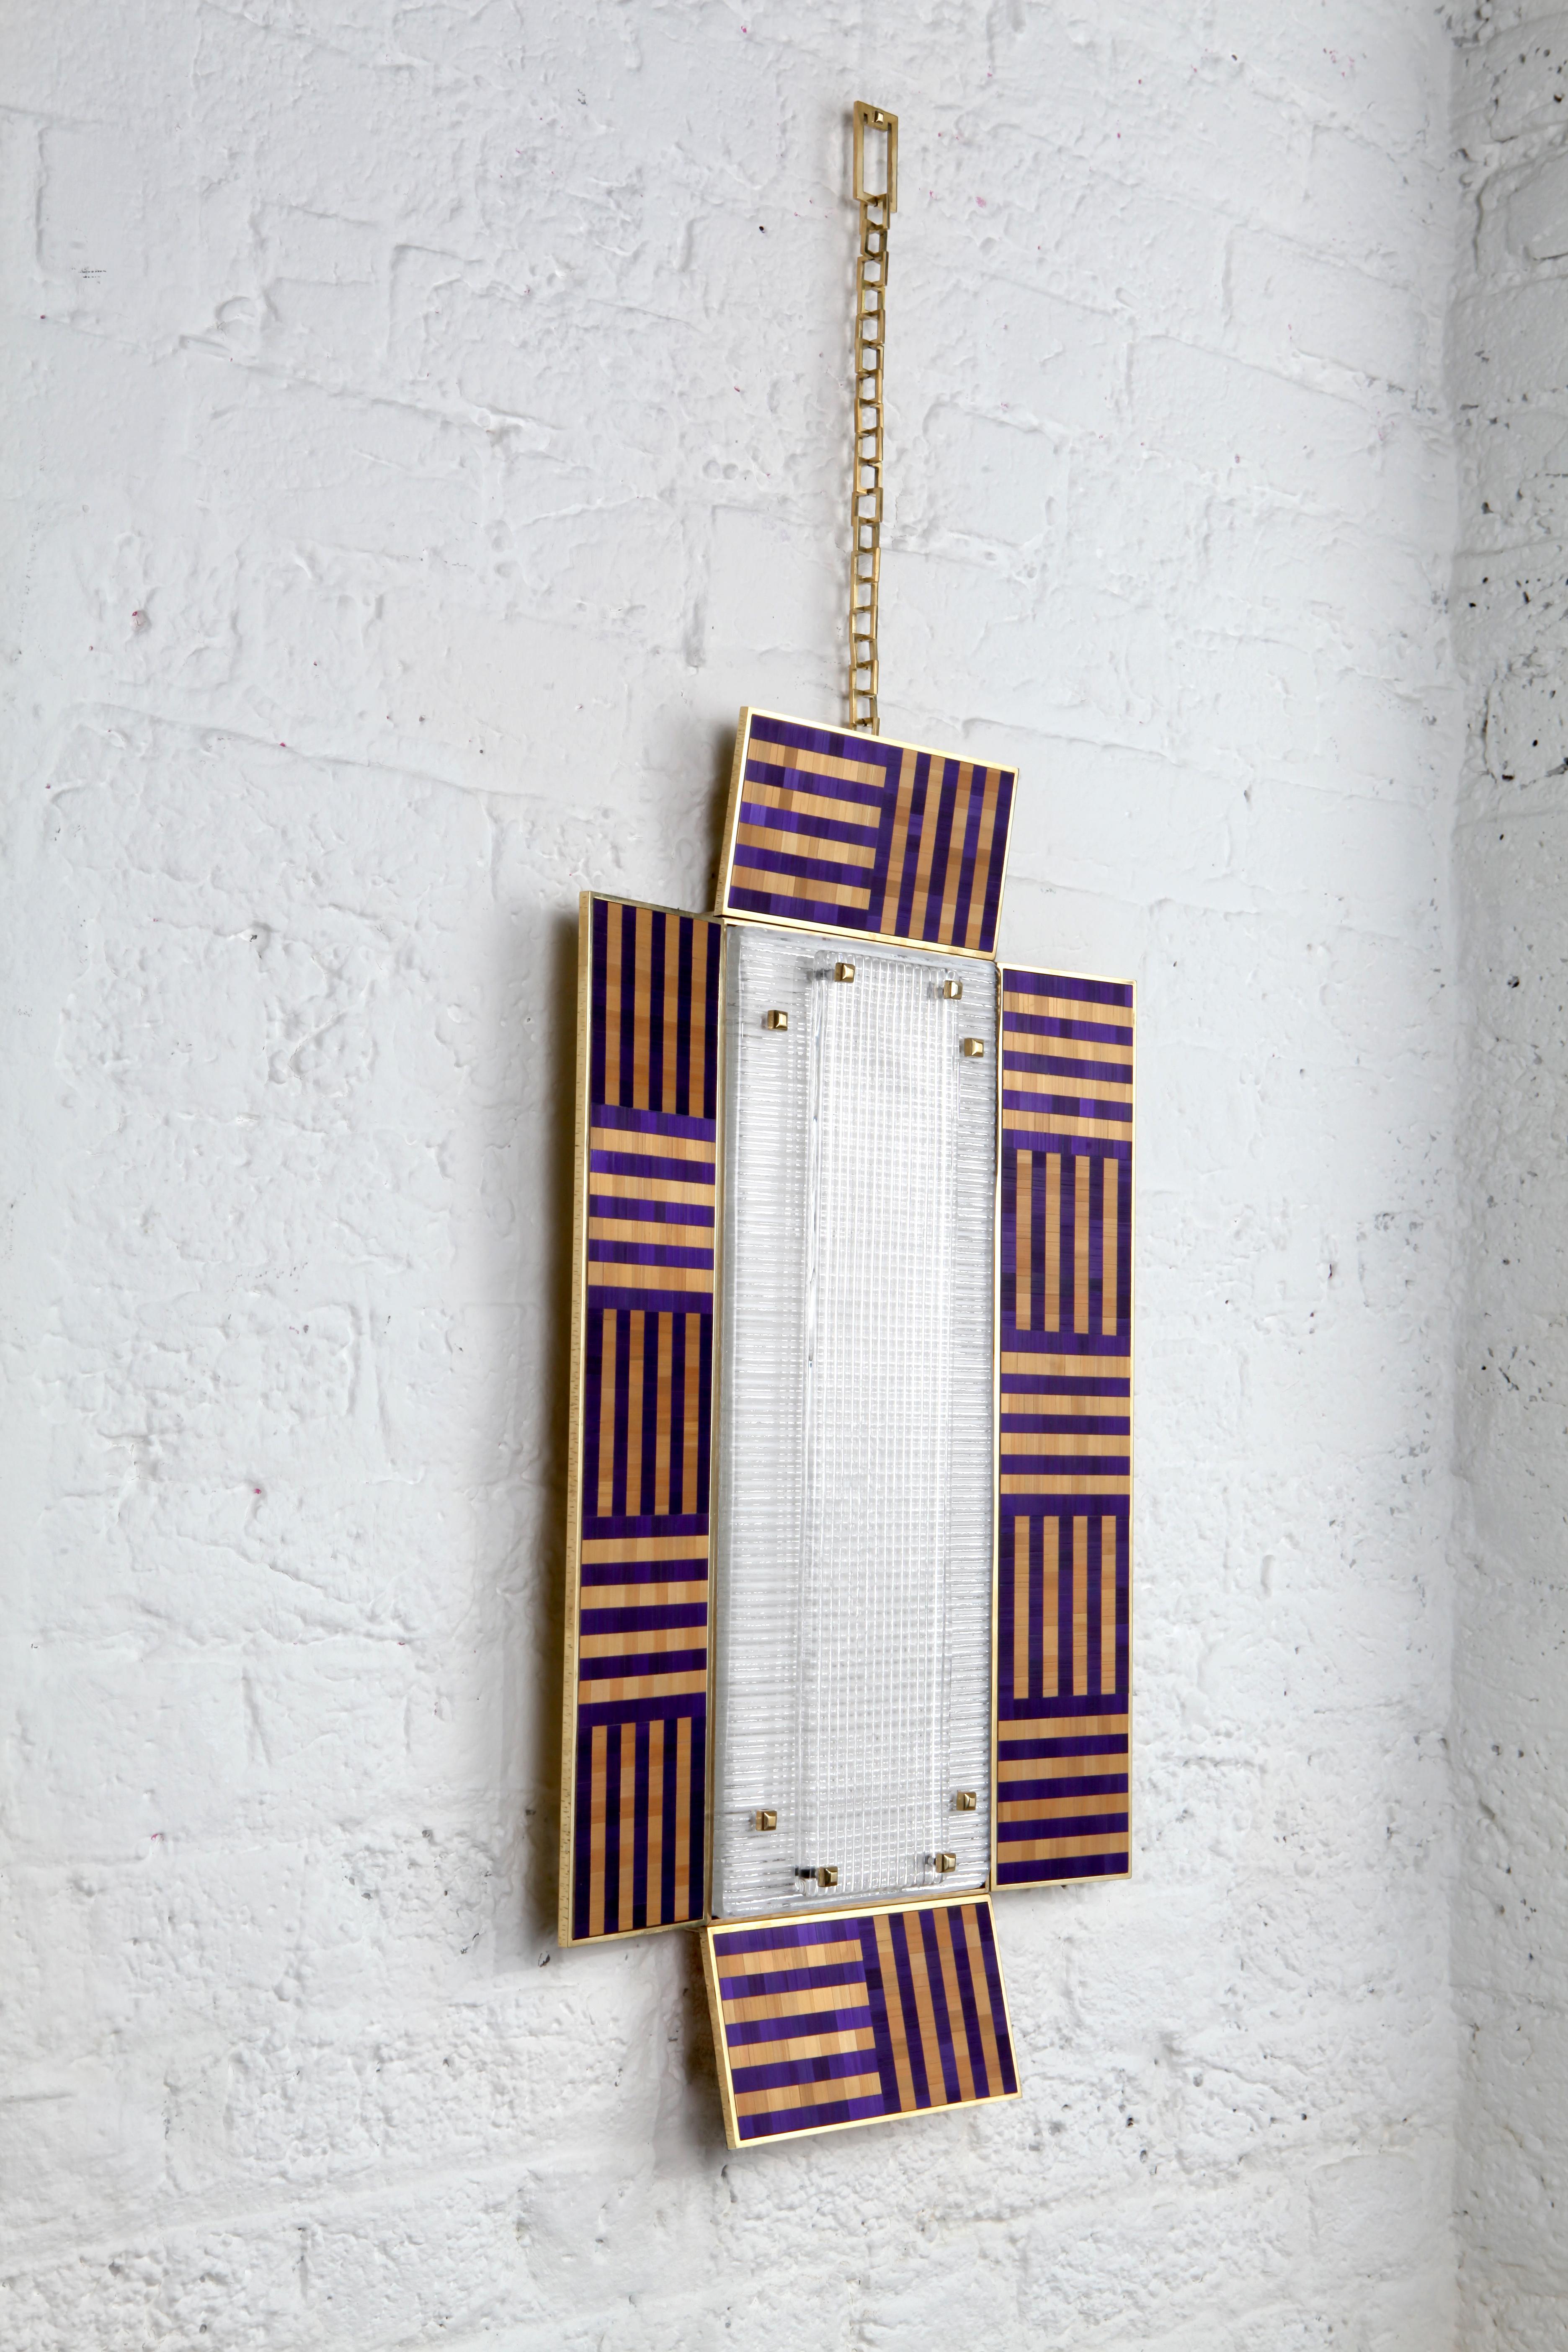 The ultra violet wall sconce is taken from Charles Burnand's Icon's collection. It features a panel of handcrafted Murano glass, set within a hammered brass frame. The surrounding panels are made using a straw marquetry finish in vibrant violet and